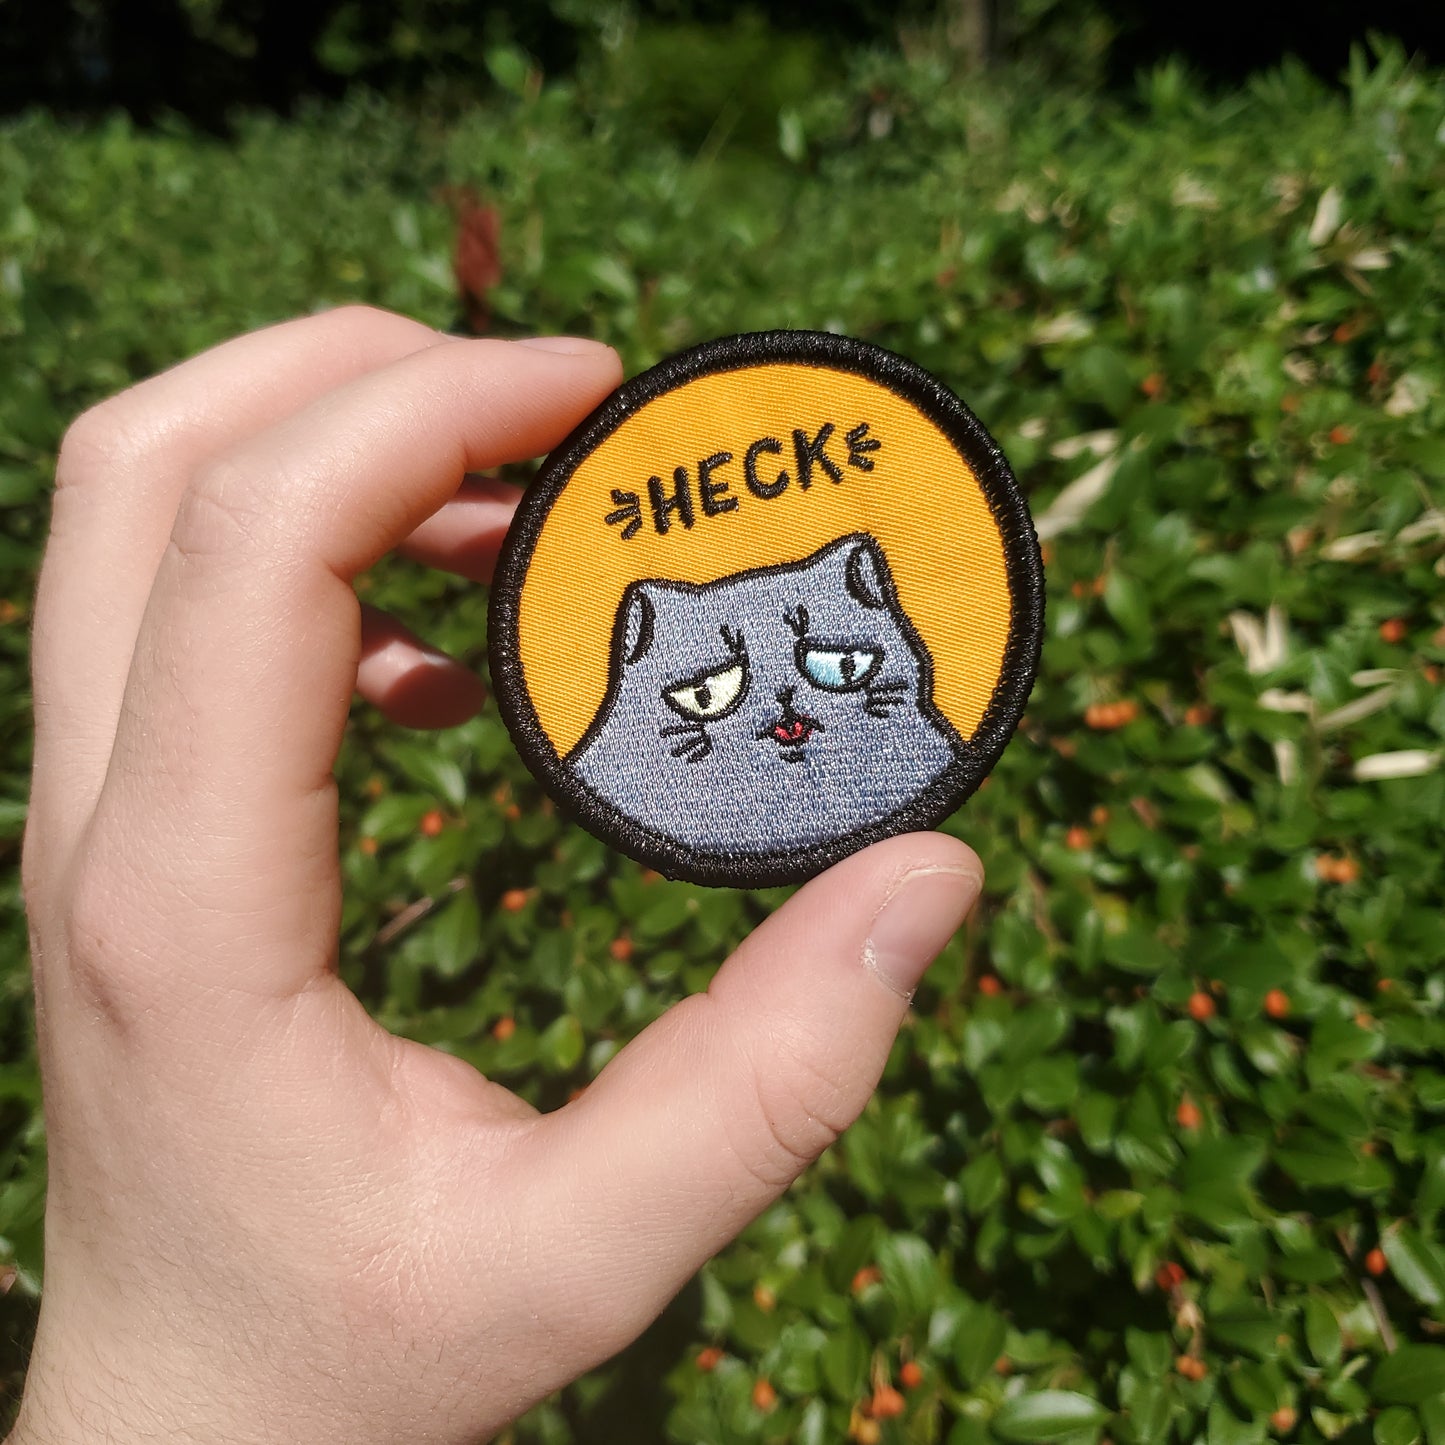 Heck Patch